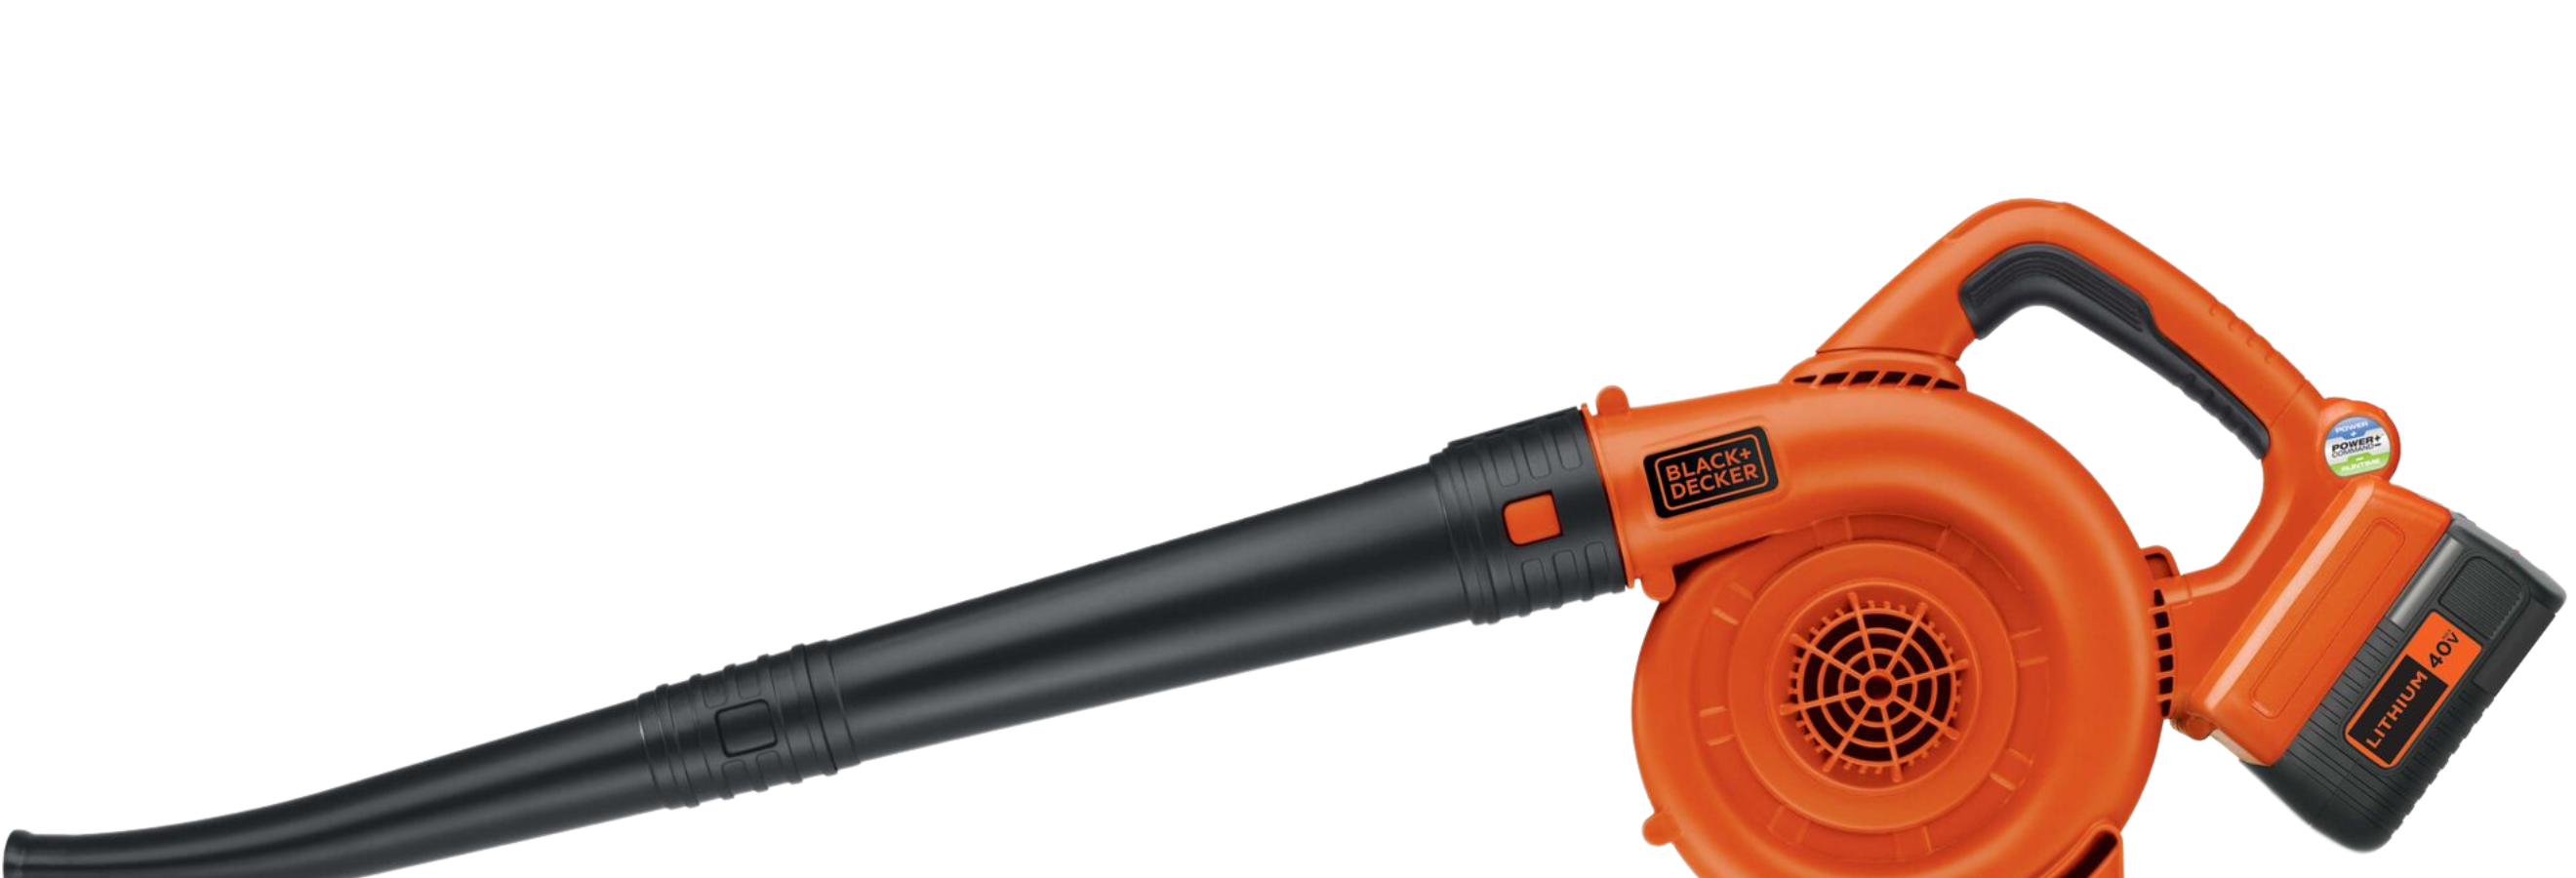 BLACK+DECKER 40V MAX Cordless Blower, Hard Surface Sweeper, Variable Speed  Up To 120 MPH, Tool Only (LSW36B)